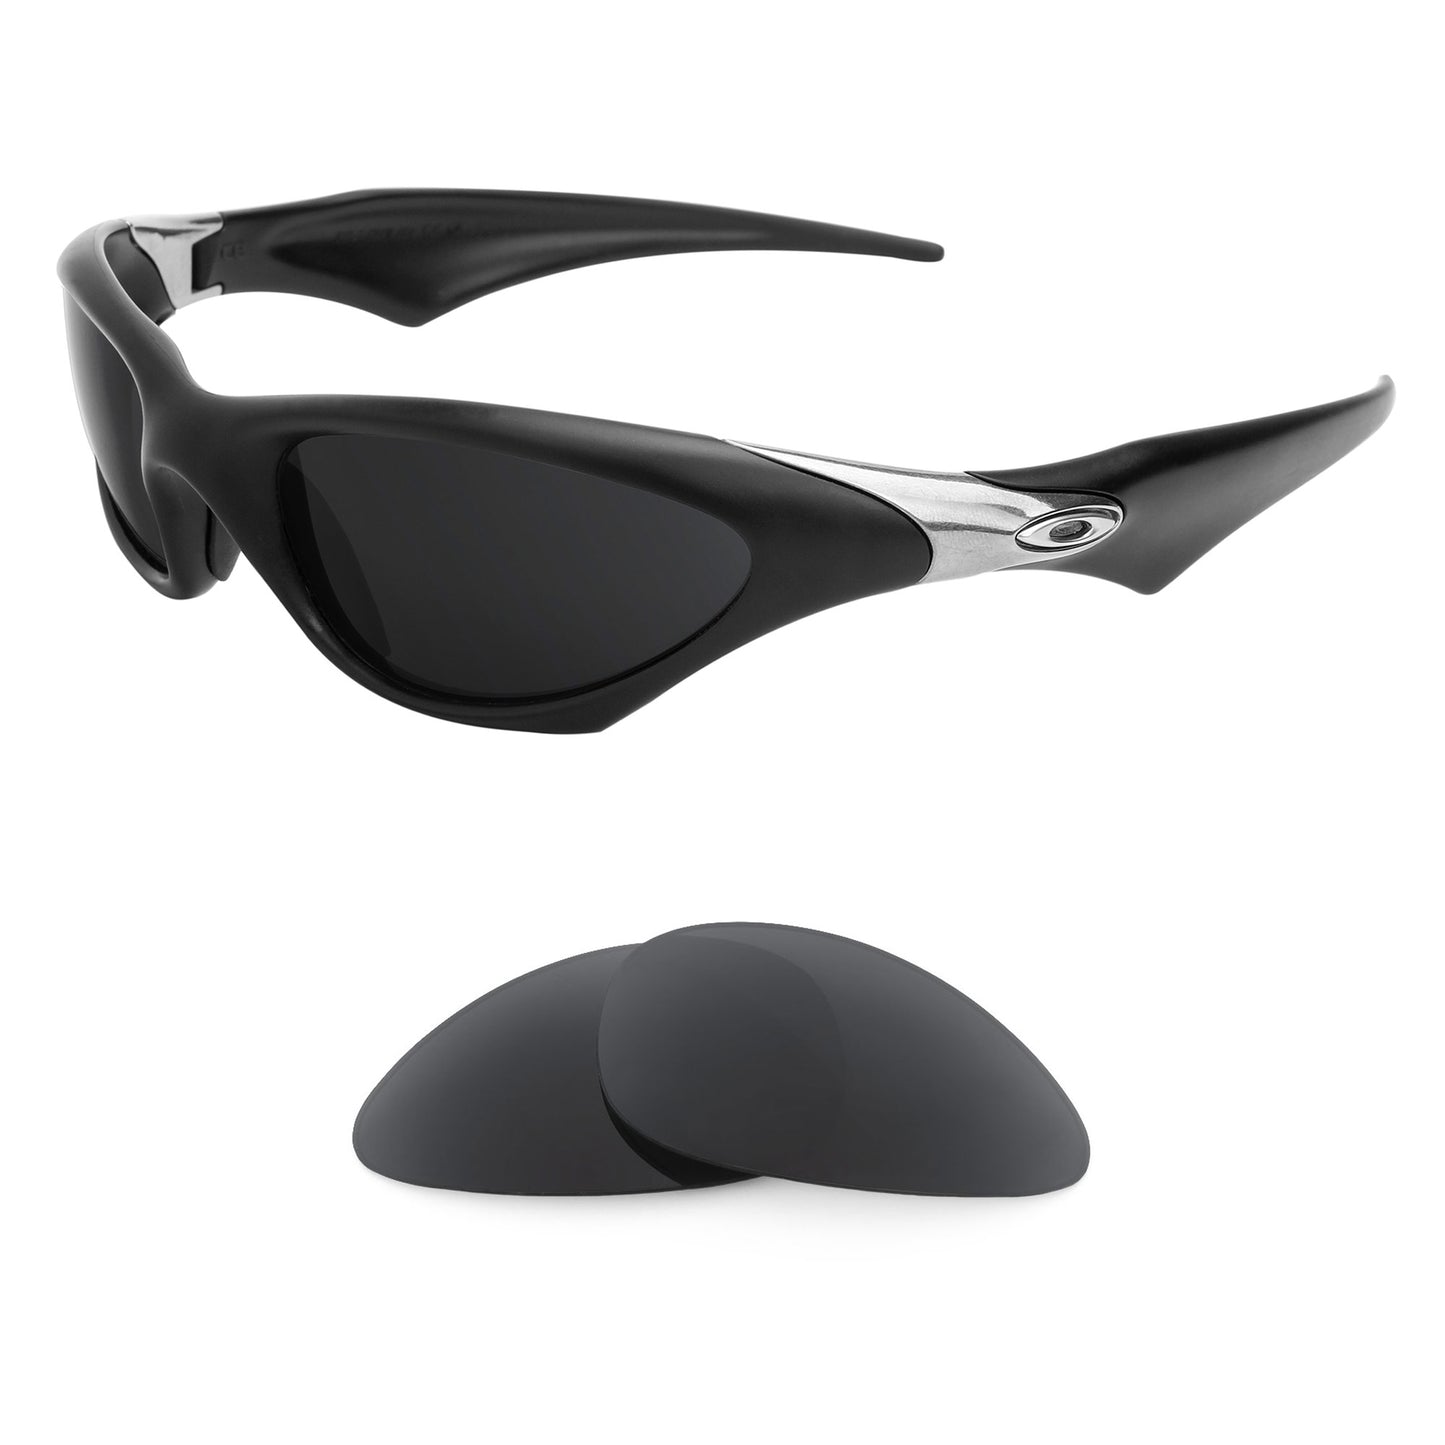 Oakley Scar sunglasses with replacement lenses